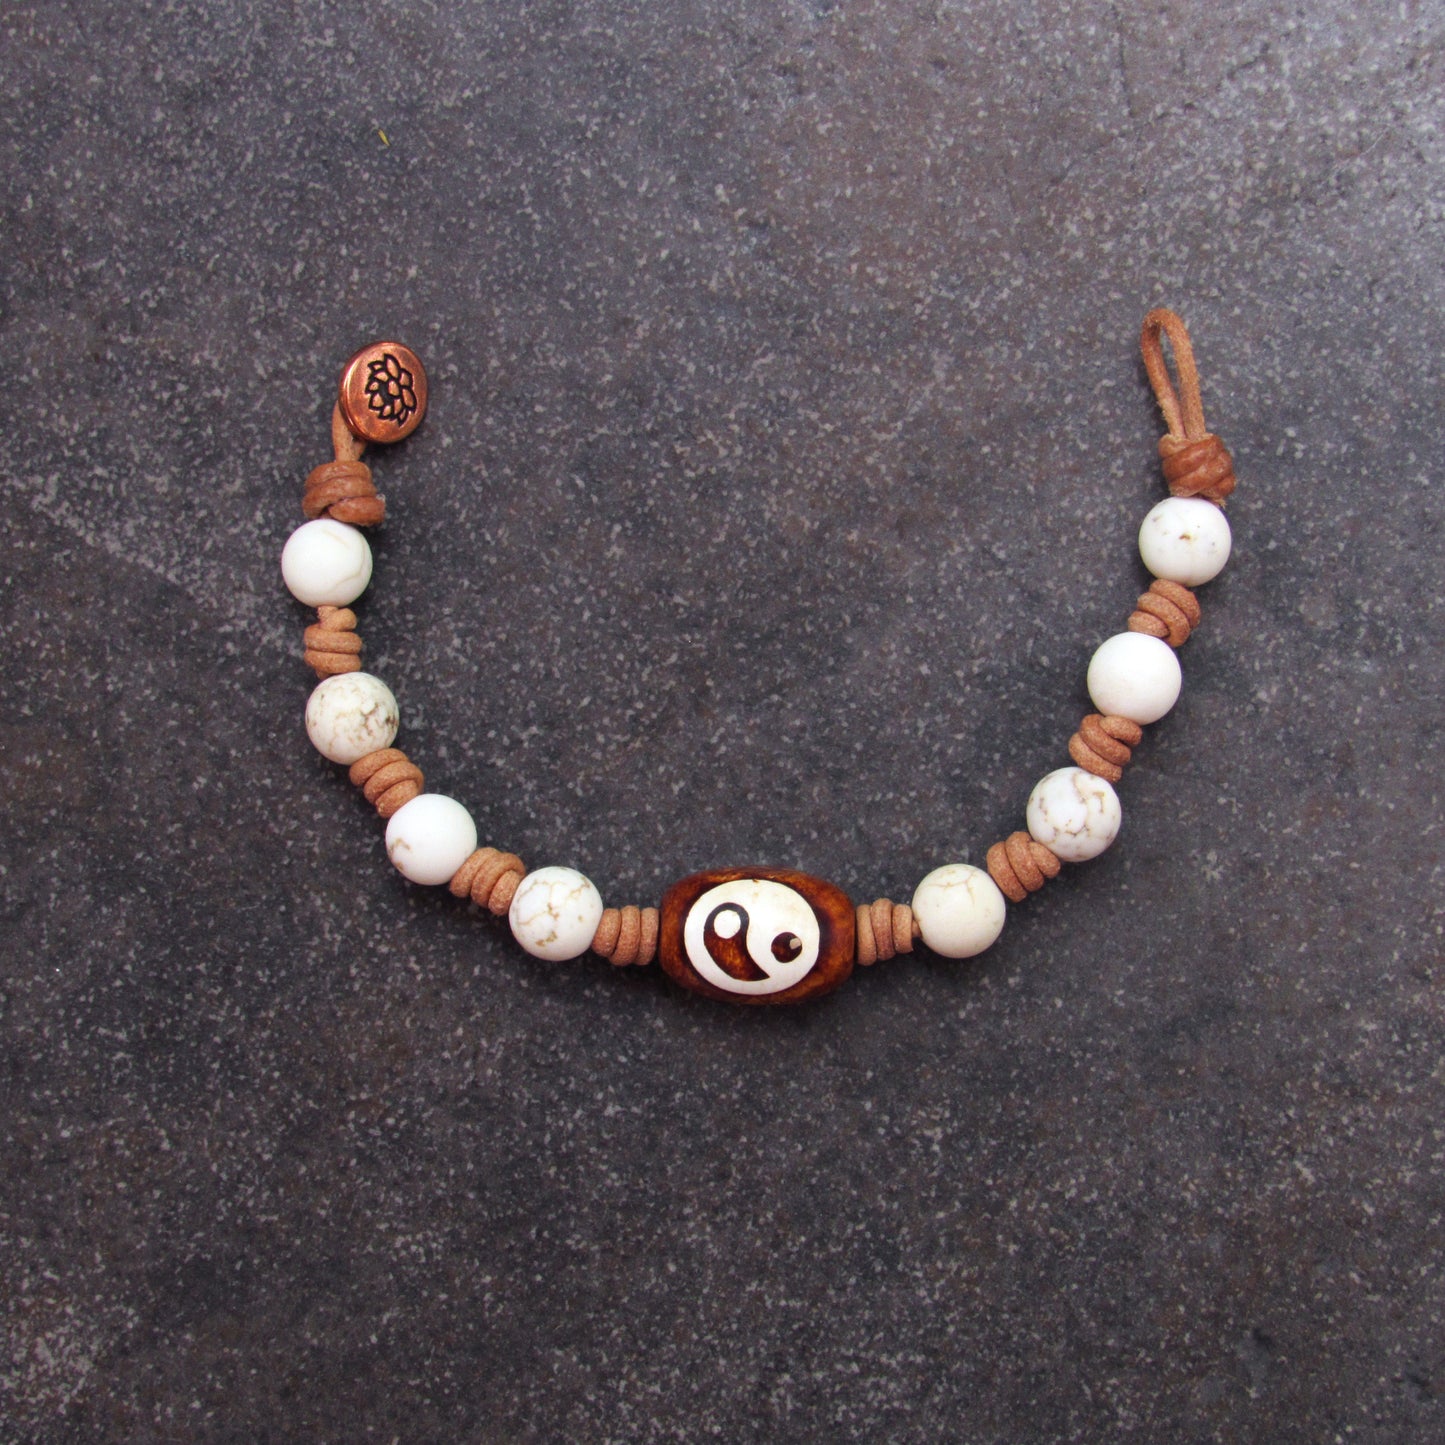 Tibetan Agate Gemstone Yin Yang with White Turquoise on natural Leather